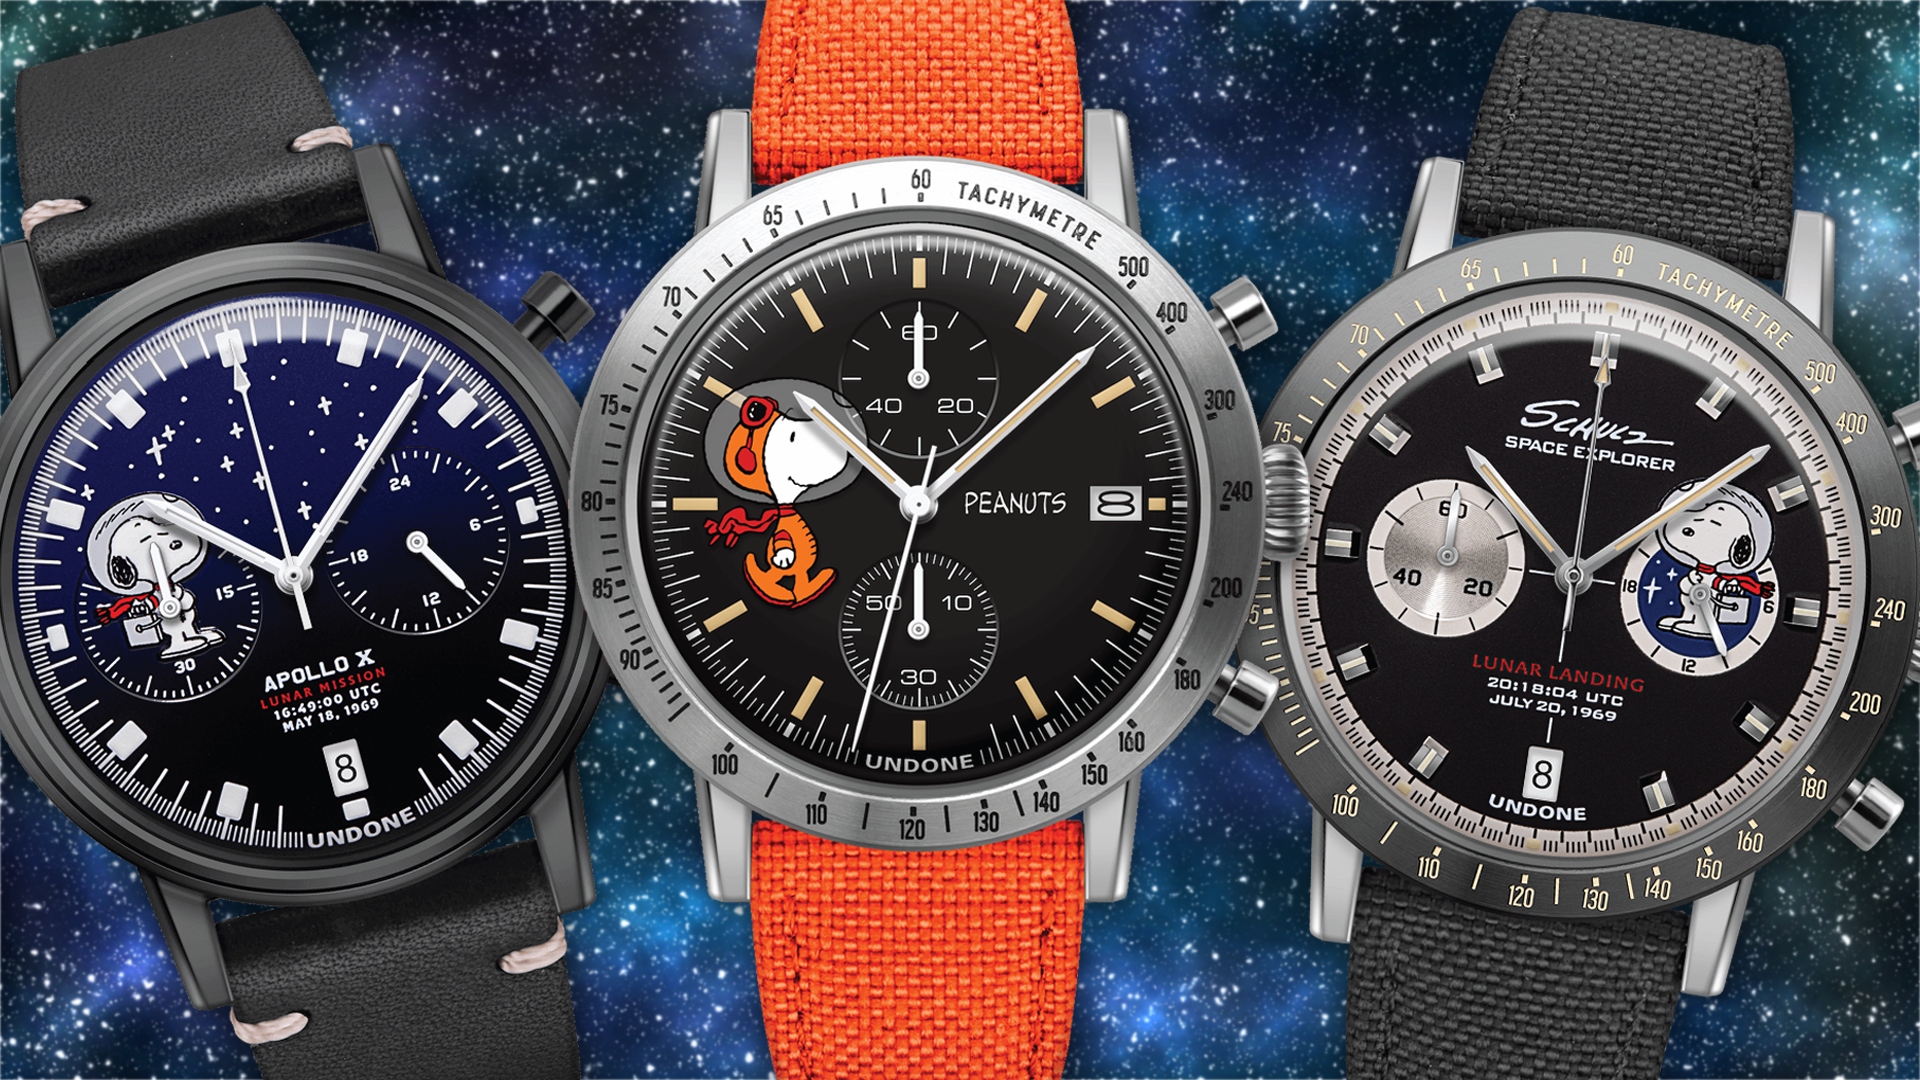 Undone X Peanuts Space Program Lunar Mission Watches Hands-On